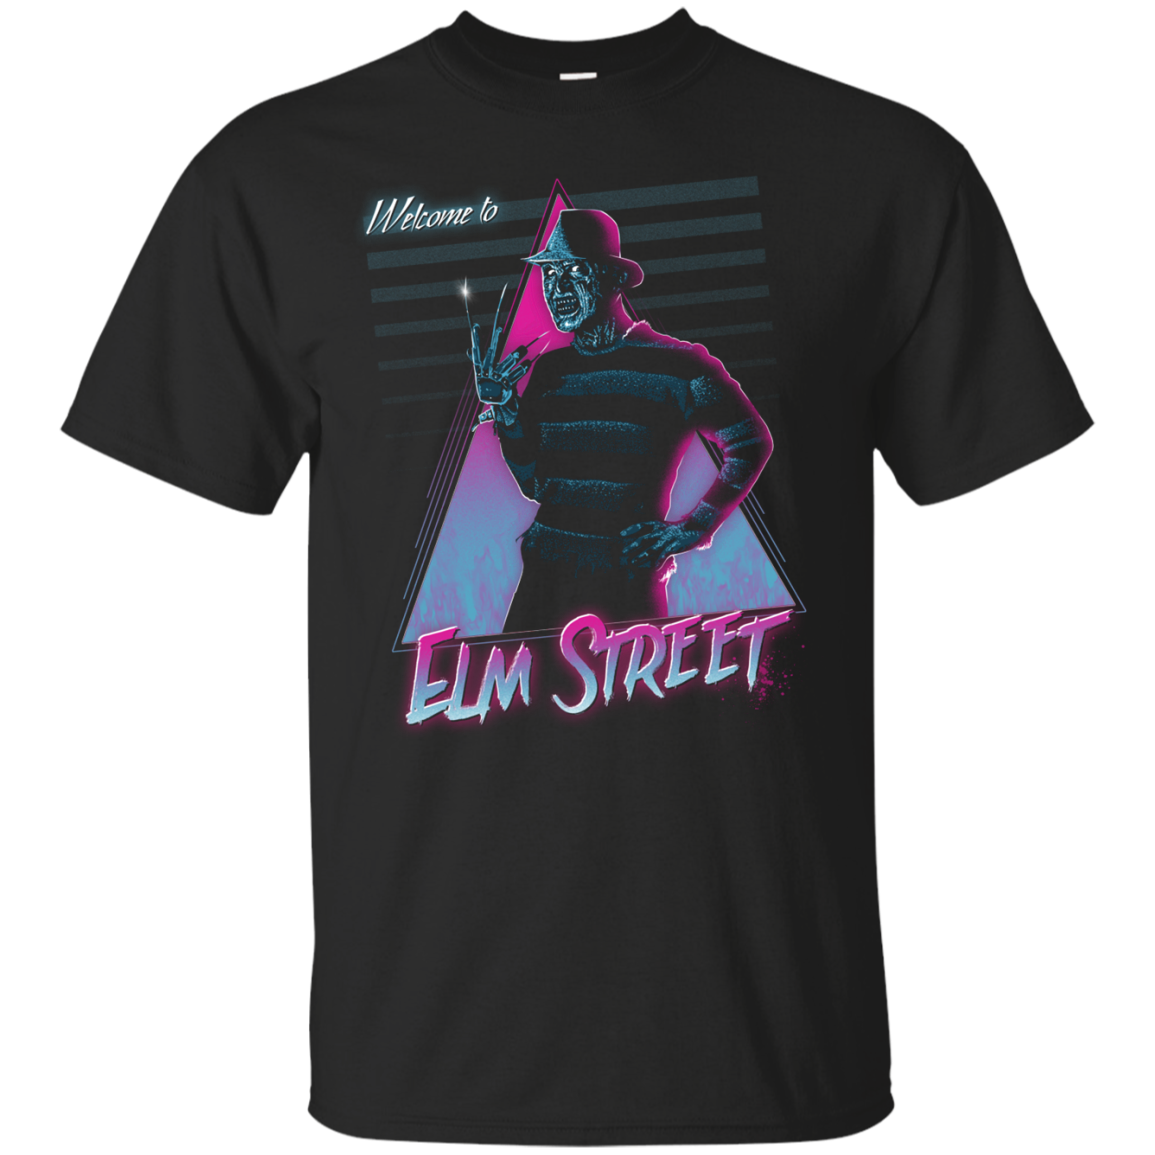 Welcome to Elm Street T-Shirt